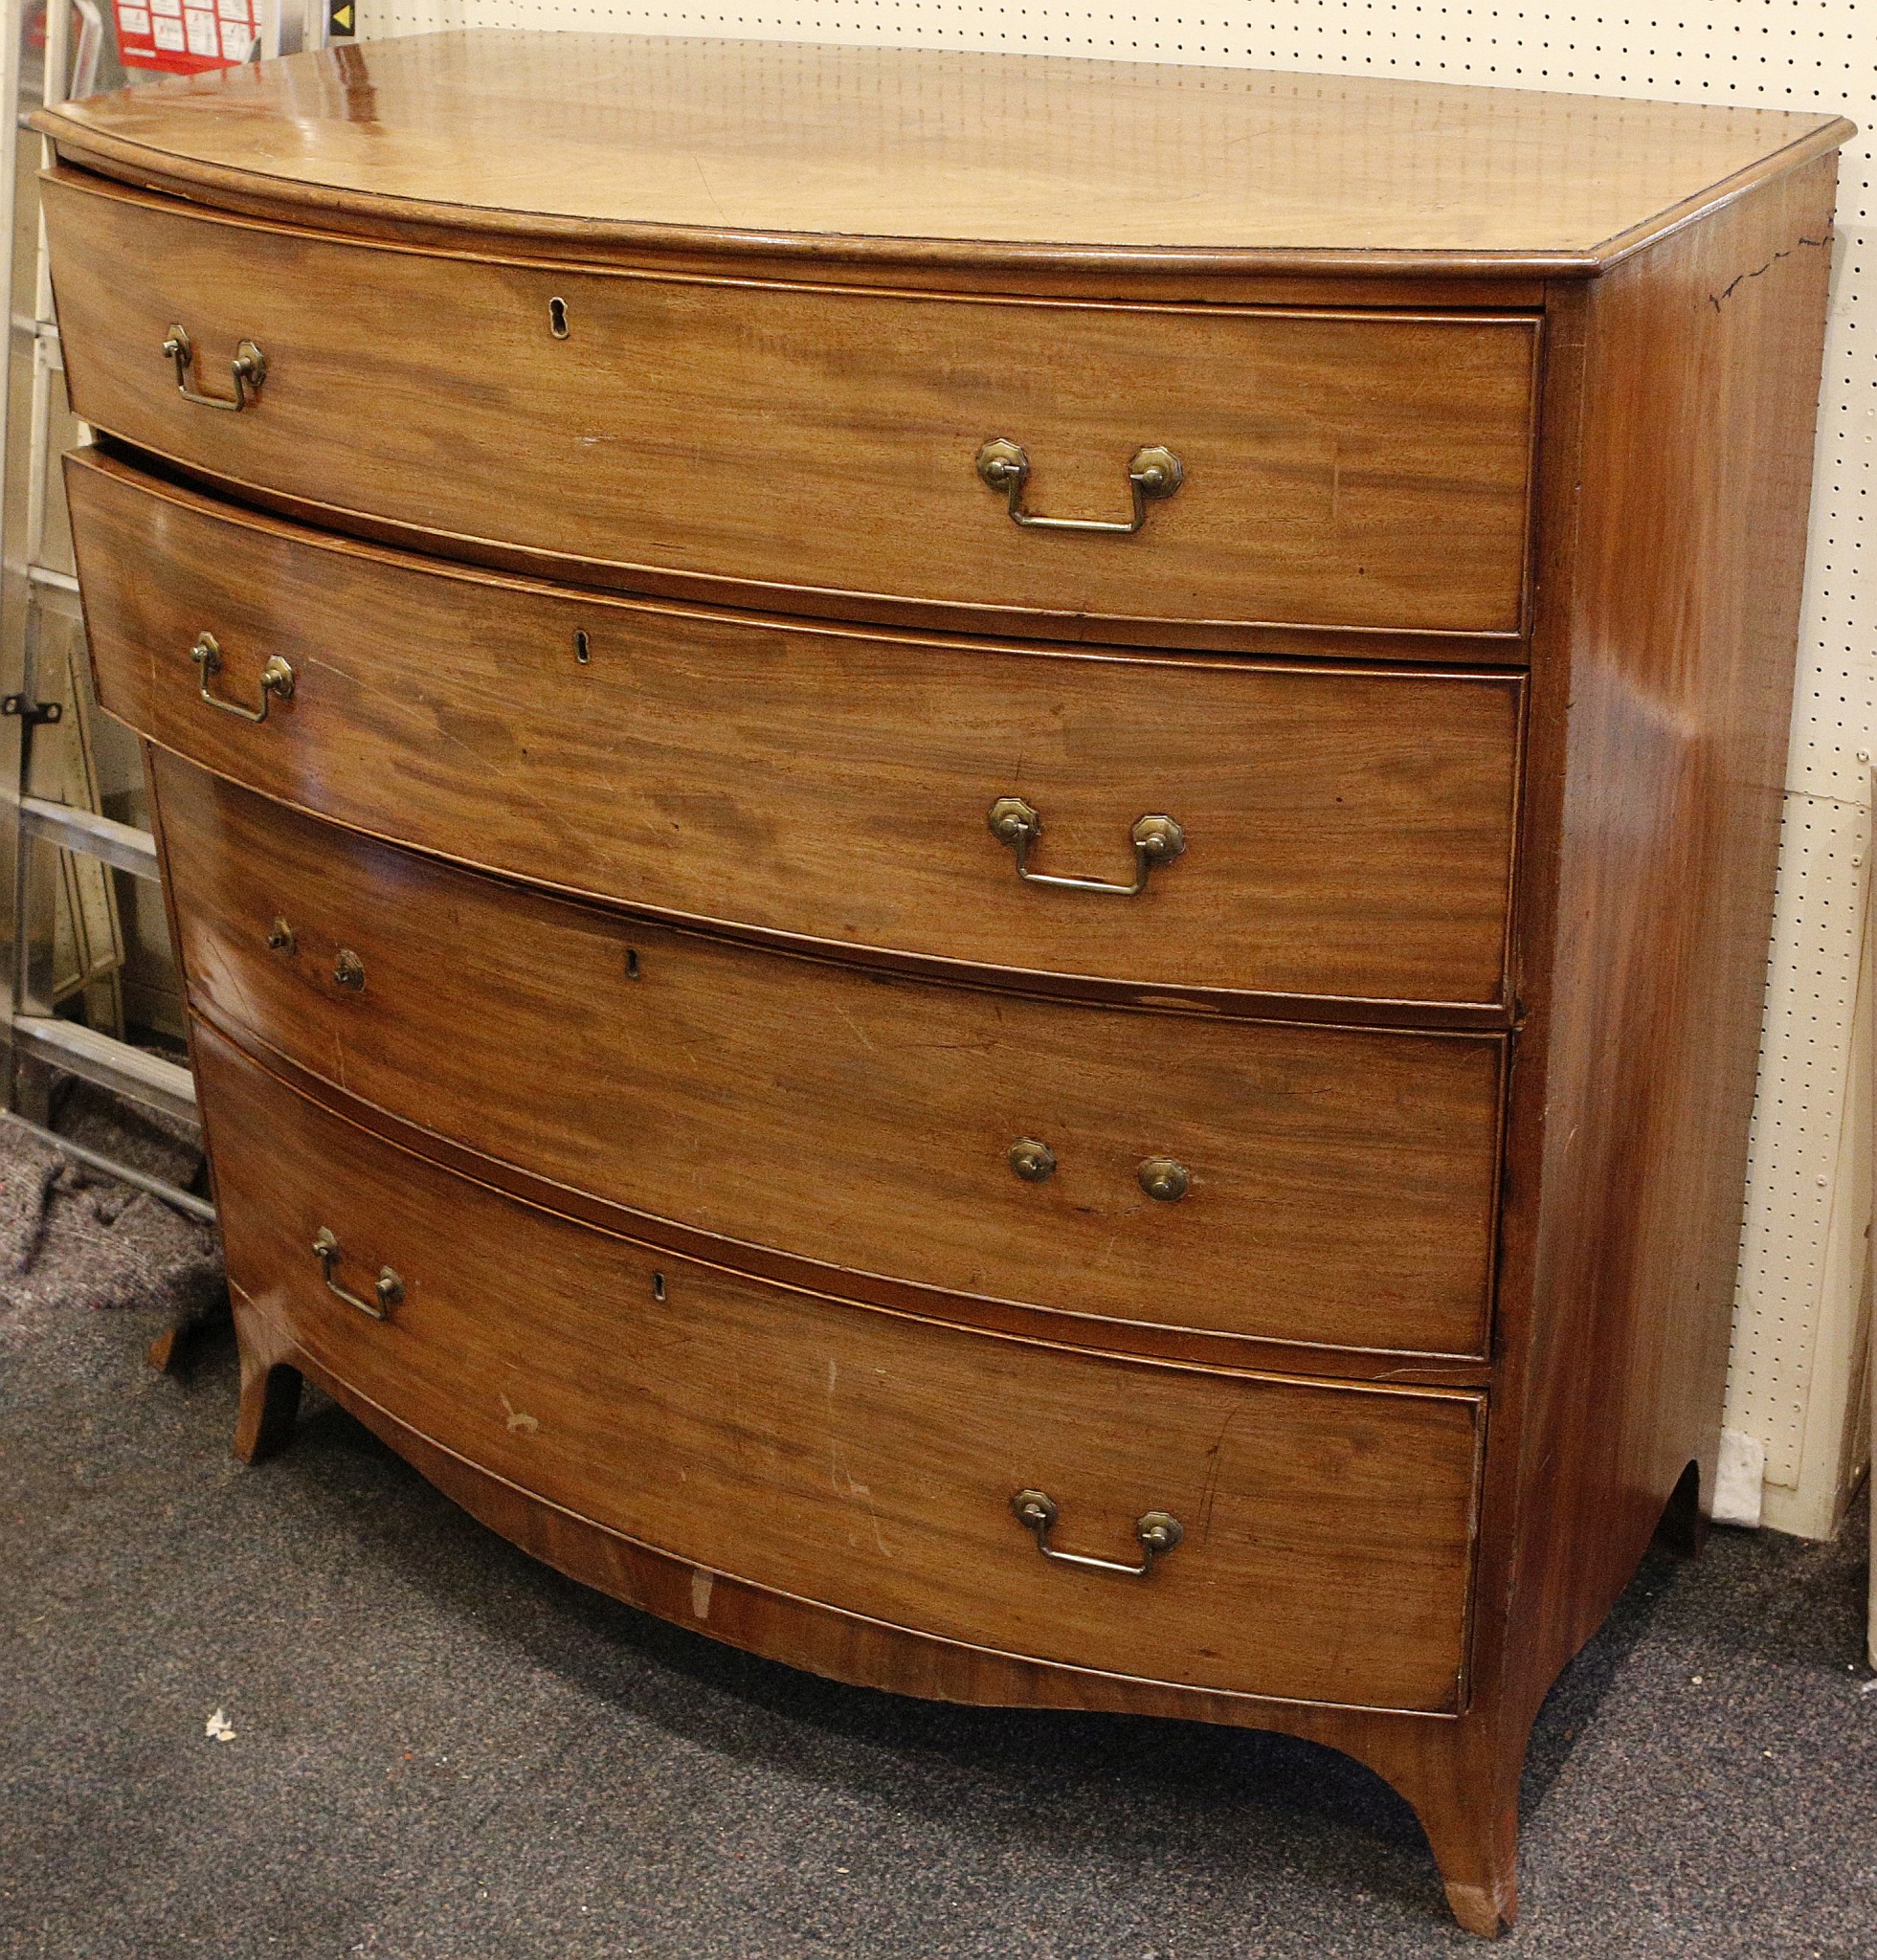 A 19th century mahogany bow fronted chest of drawers, having 4 graduated long drawers, supported